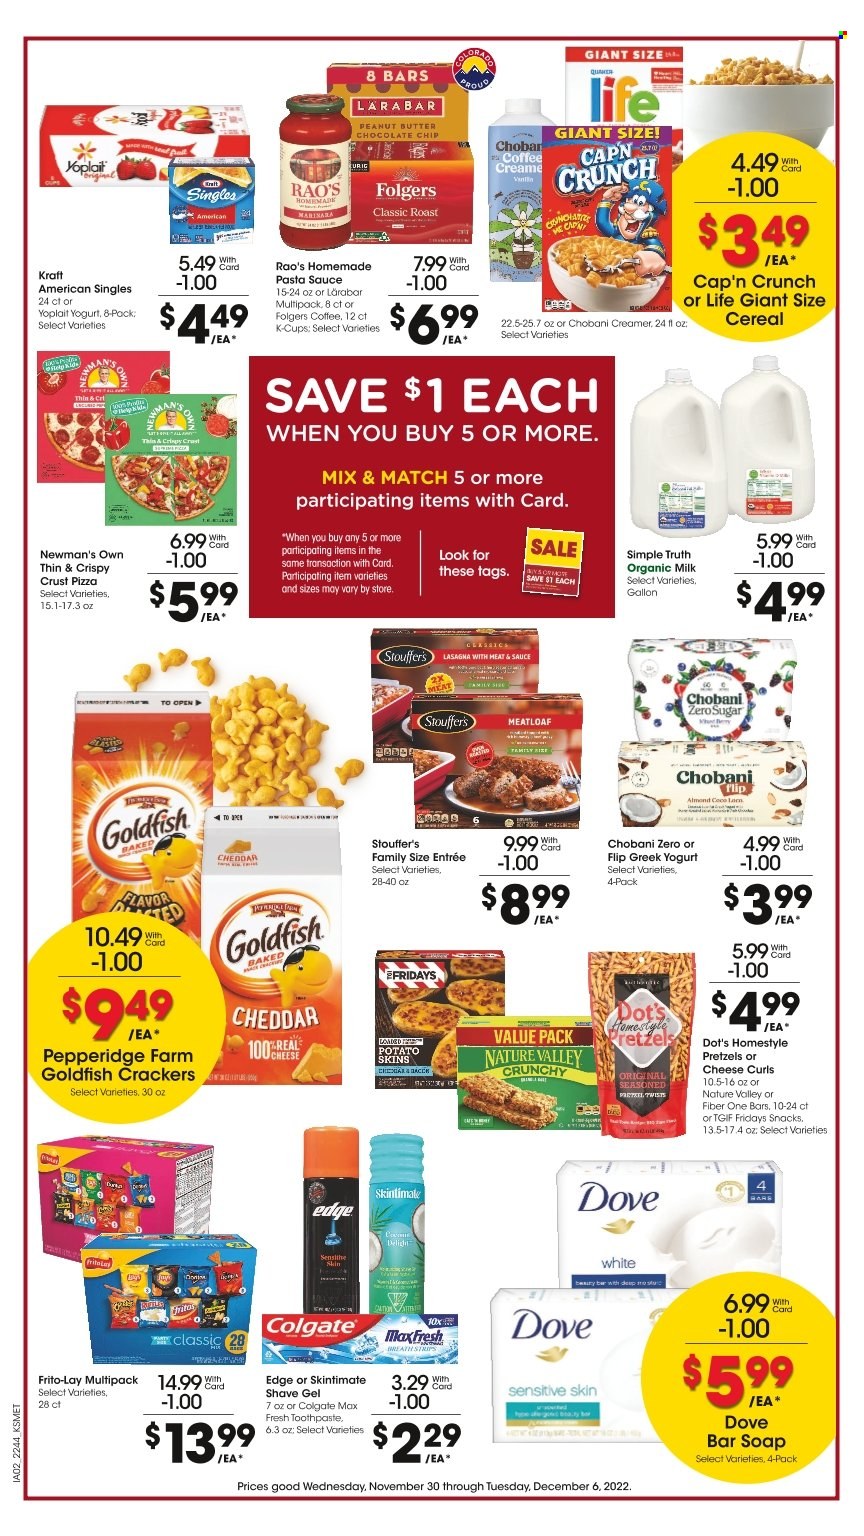 thumbnail - City Market Flyer - 11/30/2022 - 12/06/2022 - Sales products - pretzels, pizza, pasta sauce, meatloaf, Quaker, lasagna meal, Kraft®, Kraft Singles, greek yoghurt, yoghurt, Yoplait, Chobani, organic milk, creamer, strips, Stouffer's, Dove, chocolate chips, snack, crackers, Fritos, Goldfish, Frito-Lay, cereals, Cap'n Crunch, Nature Valley, Fiber One, peanut butter, coffee, Folgers, coffee capsules, K-Cups, soap bar, soap, Colgate, toothpaste, Crest, shave gel, Hama. Page 3.